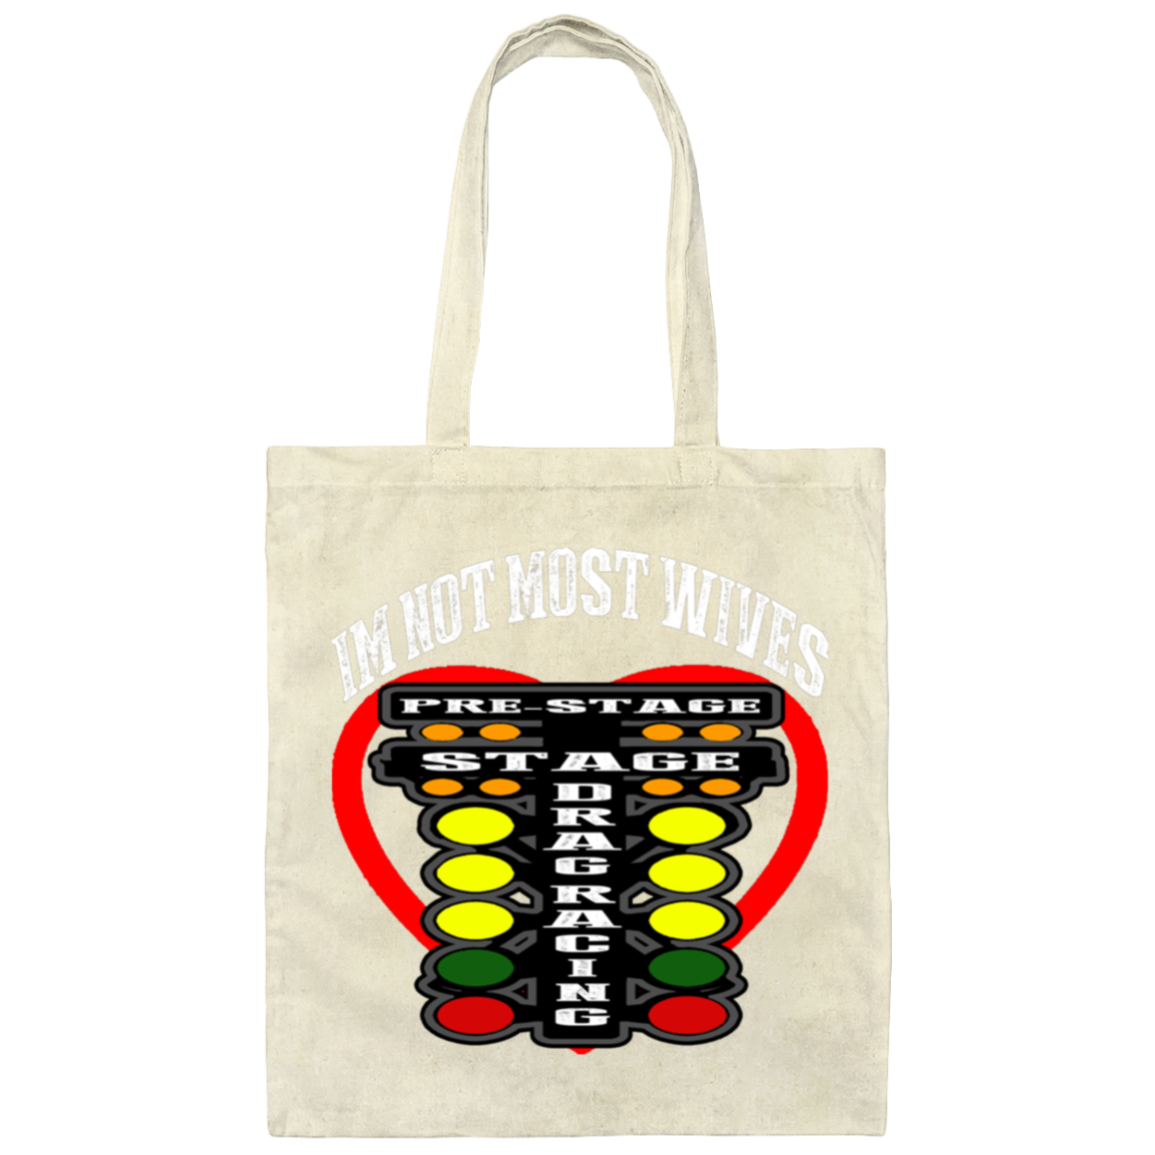 I'm Not Most Wives Drag Racing Canvas Tote Bag